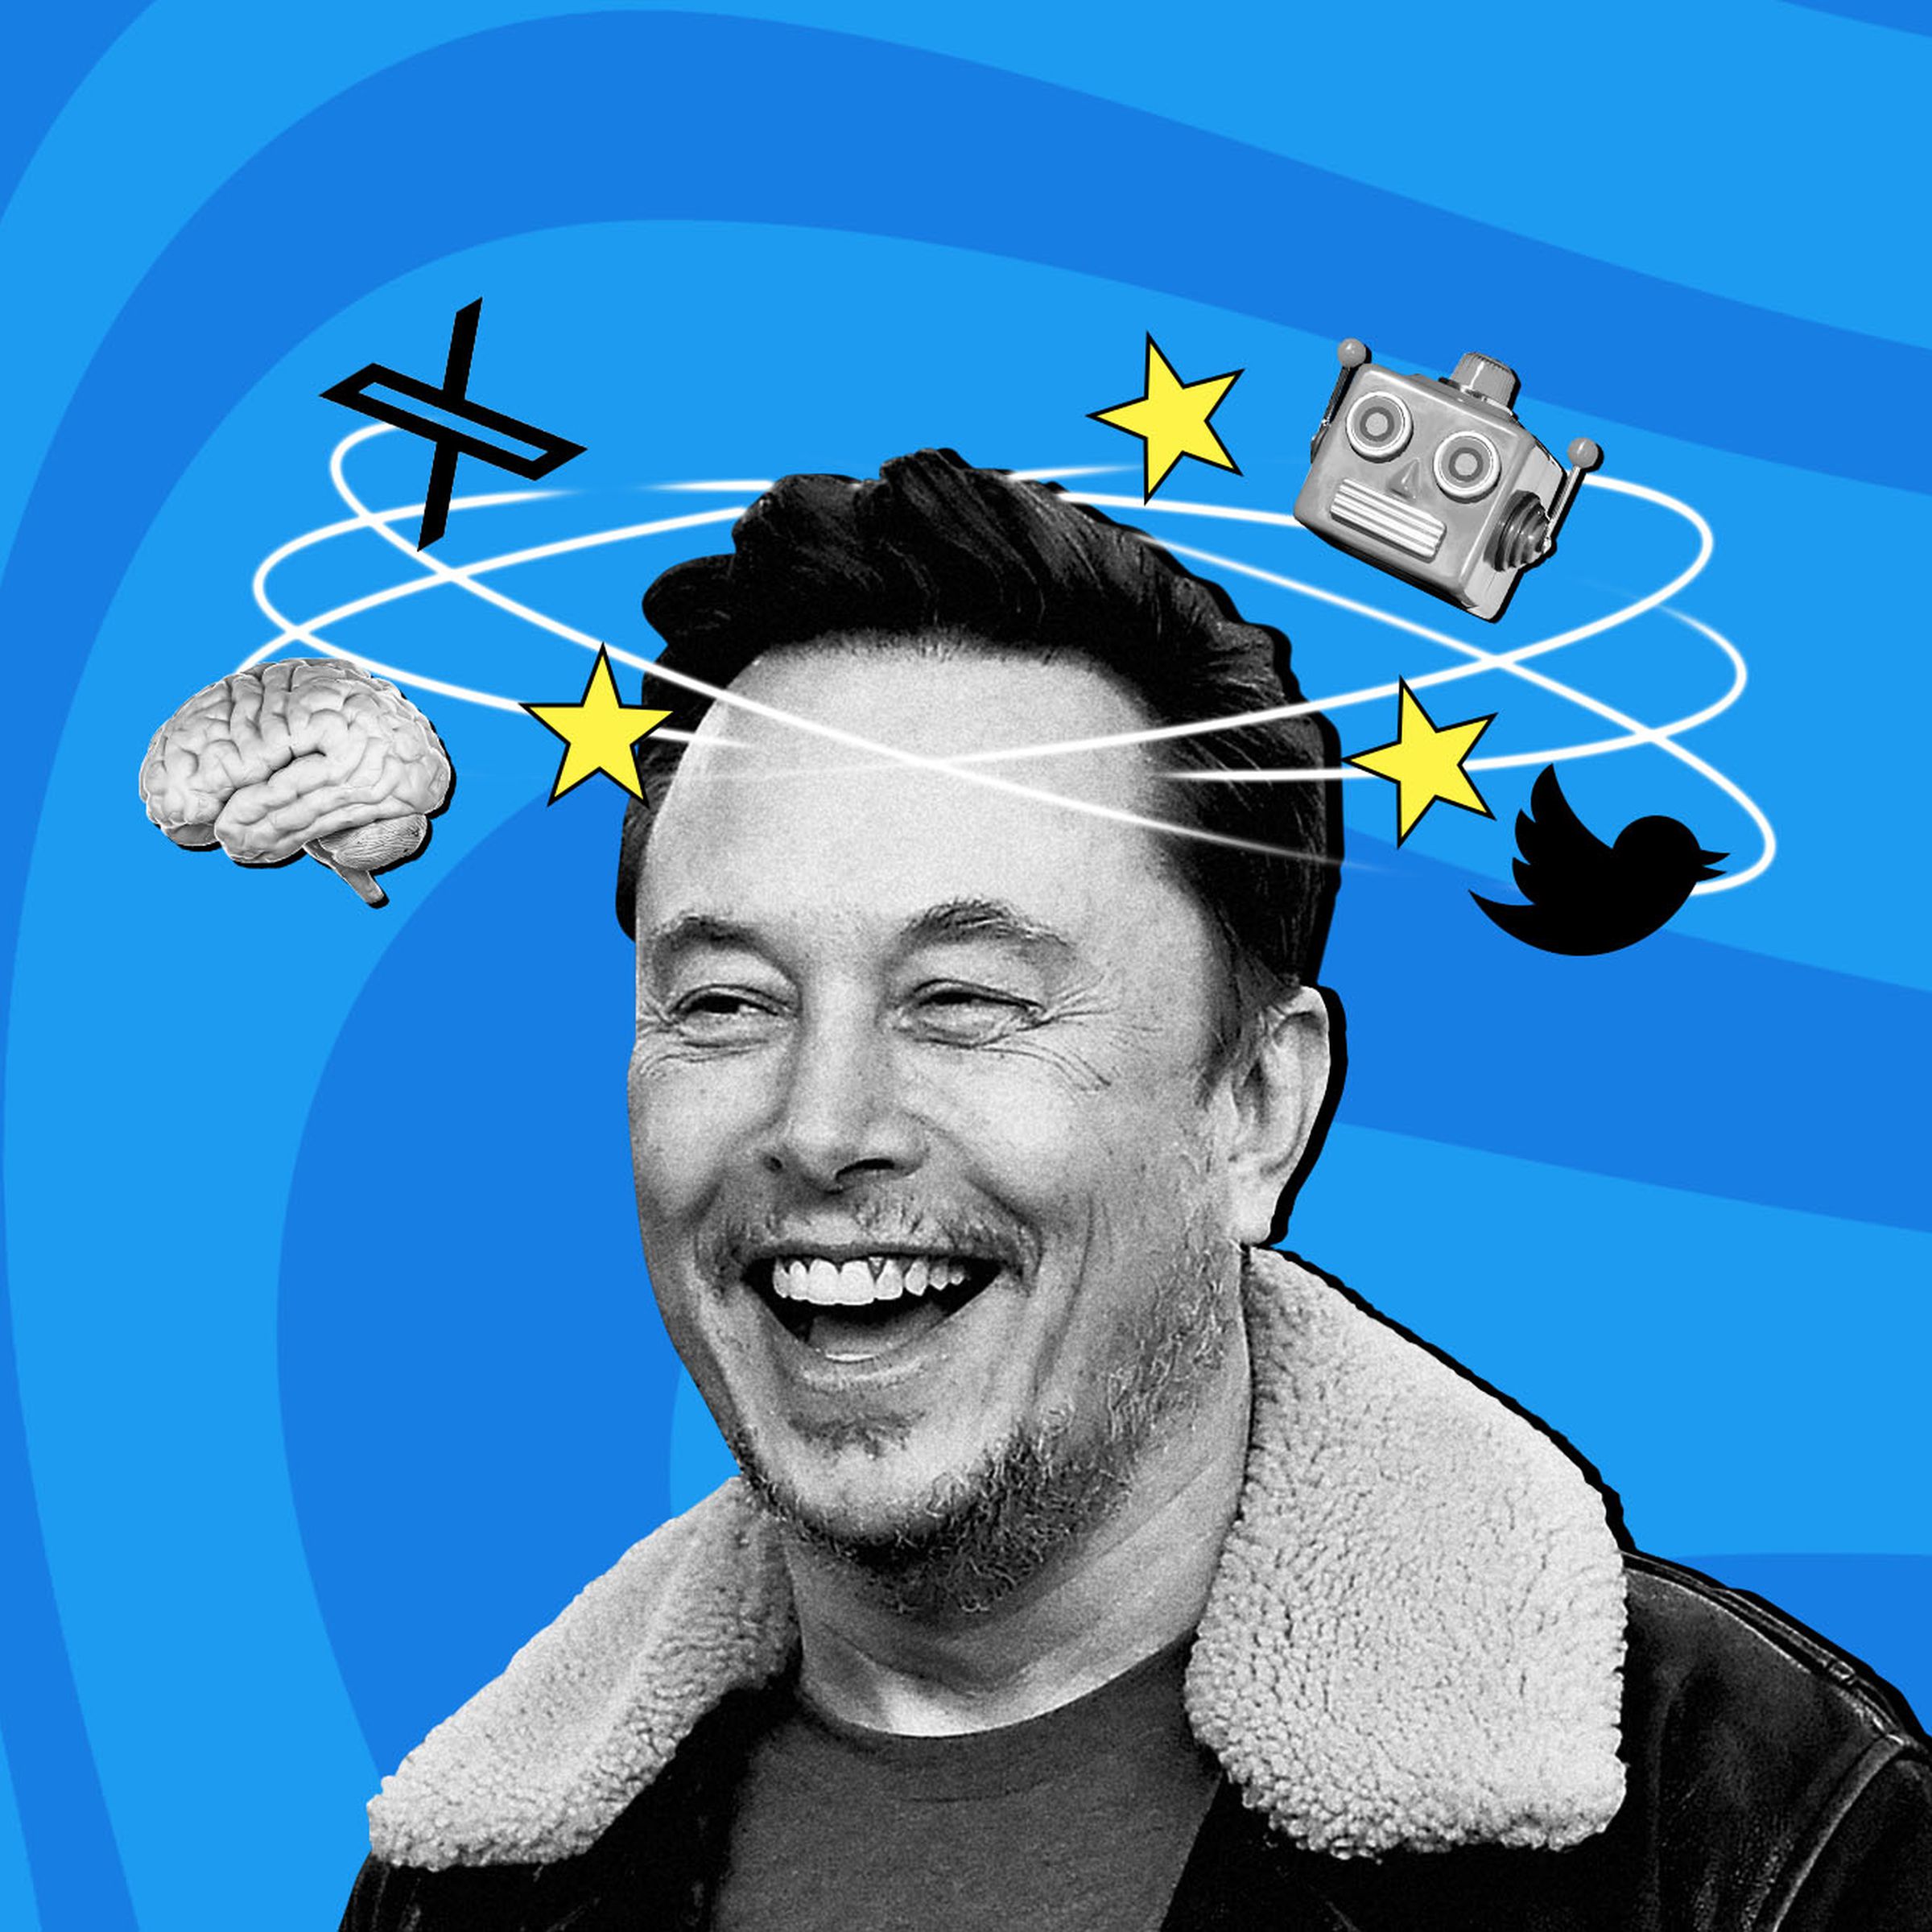 Photo illustration of Elon Musk with stars flying around his head in a cartoon-like fashion, as if he is dizzy.